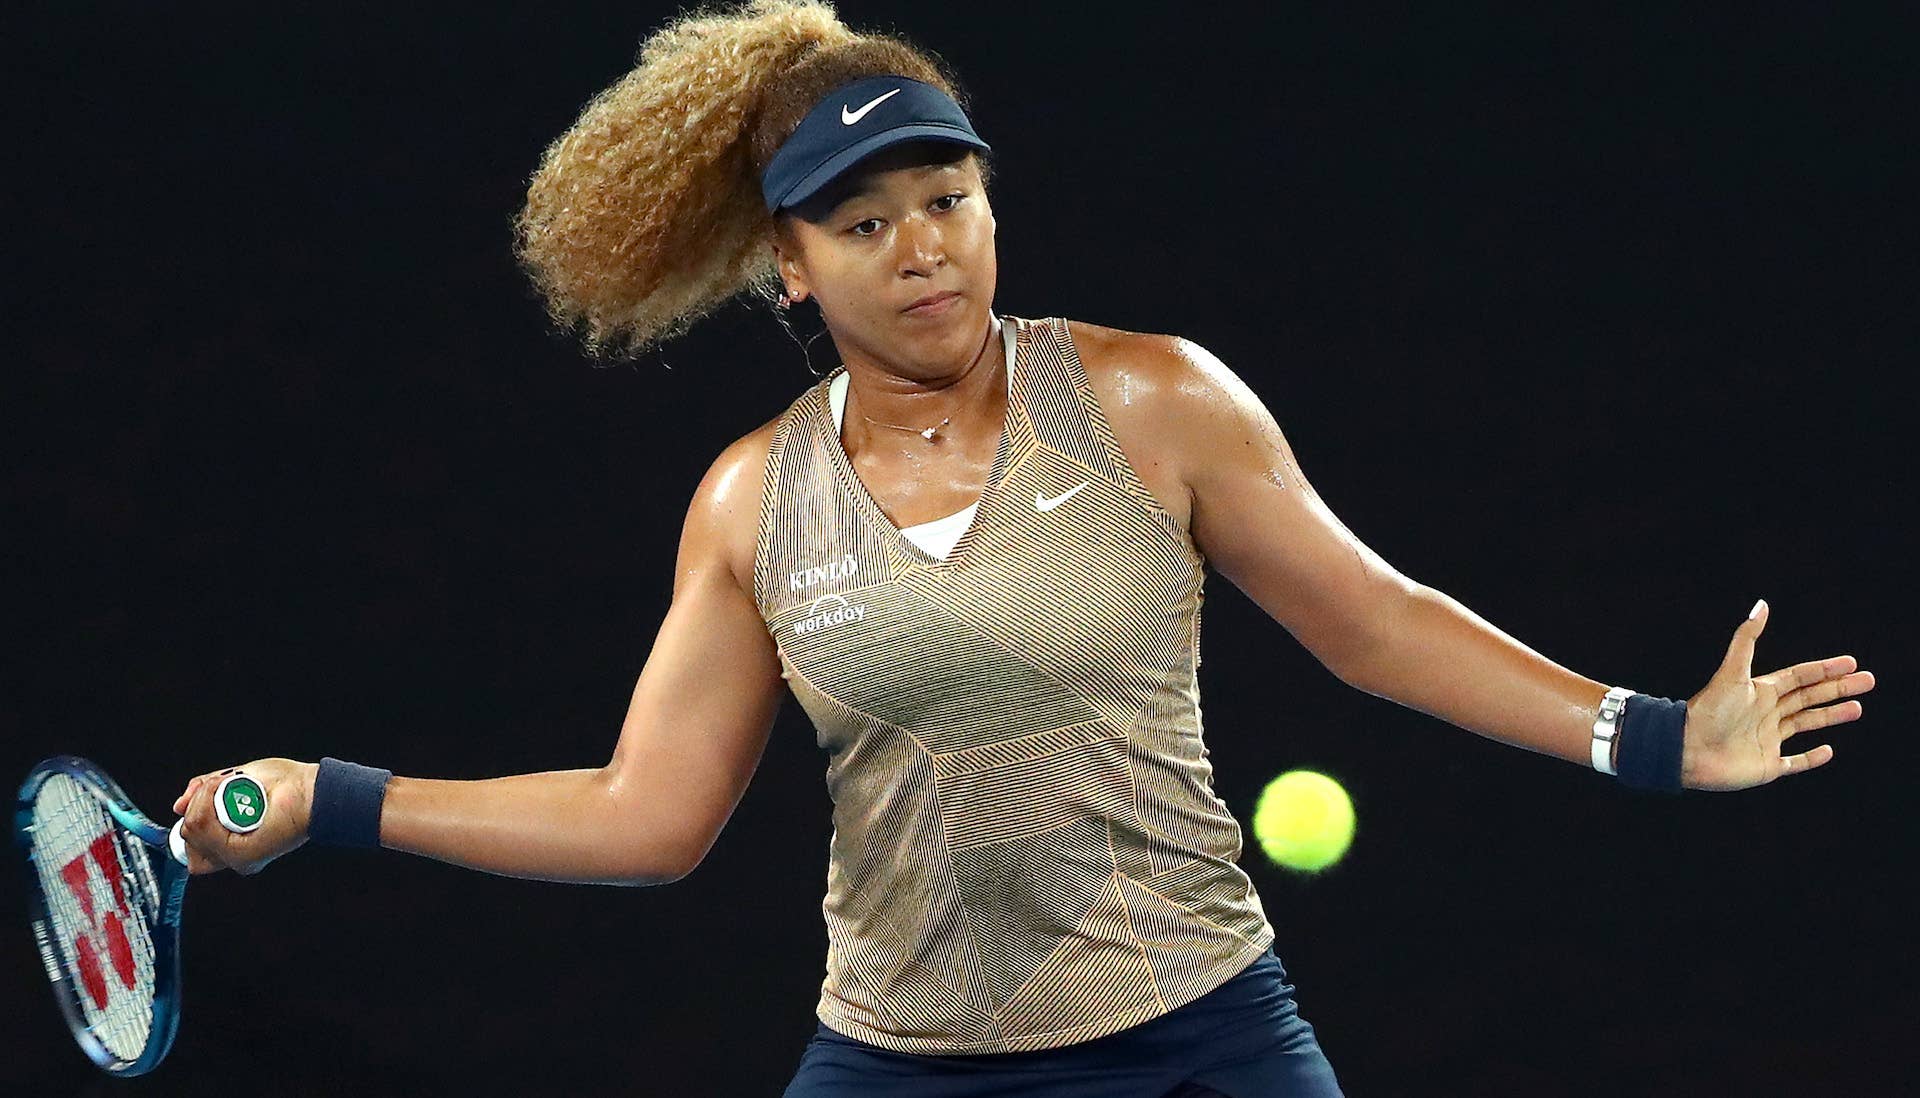 Naomi Osaka playing in the 2021 Melbourne tournament